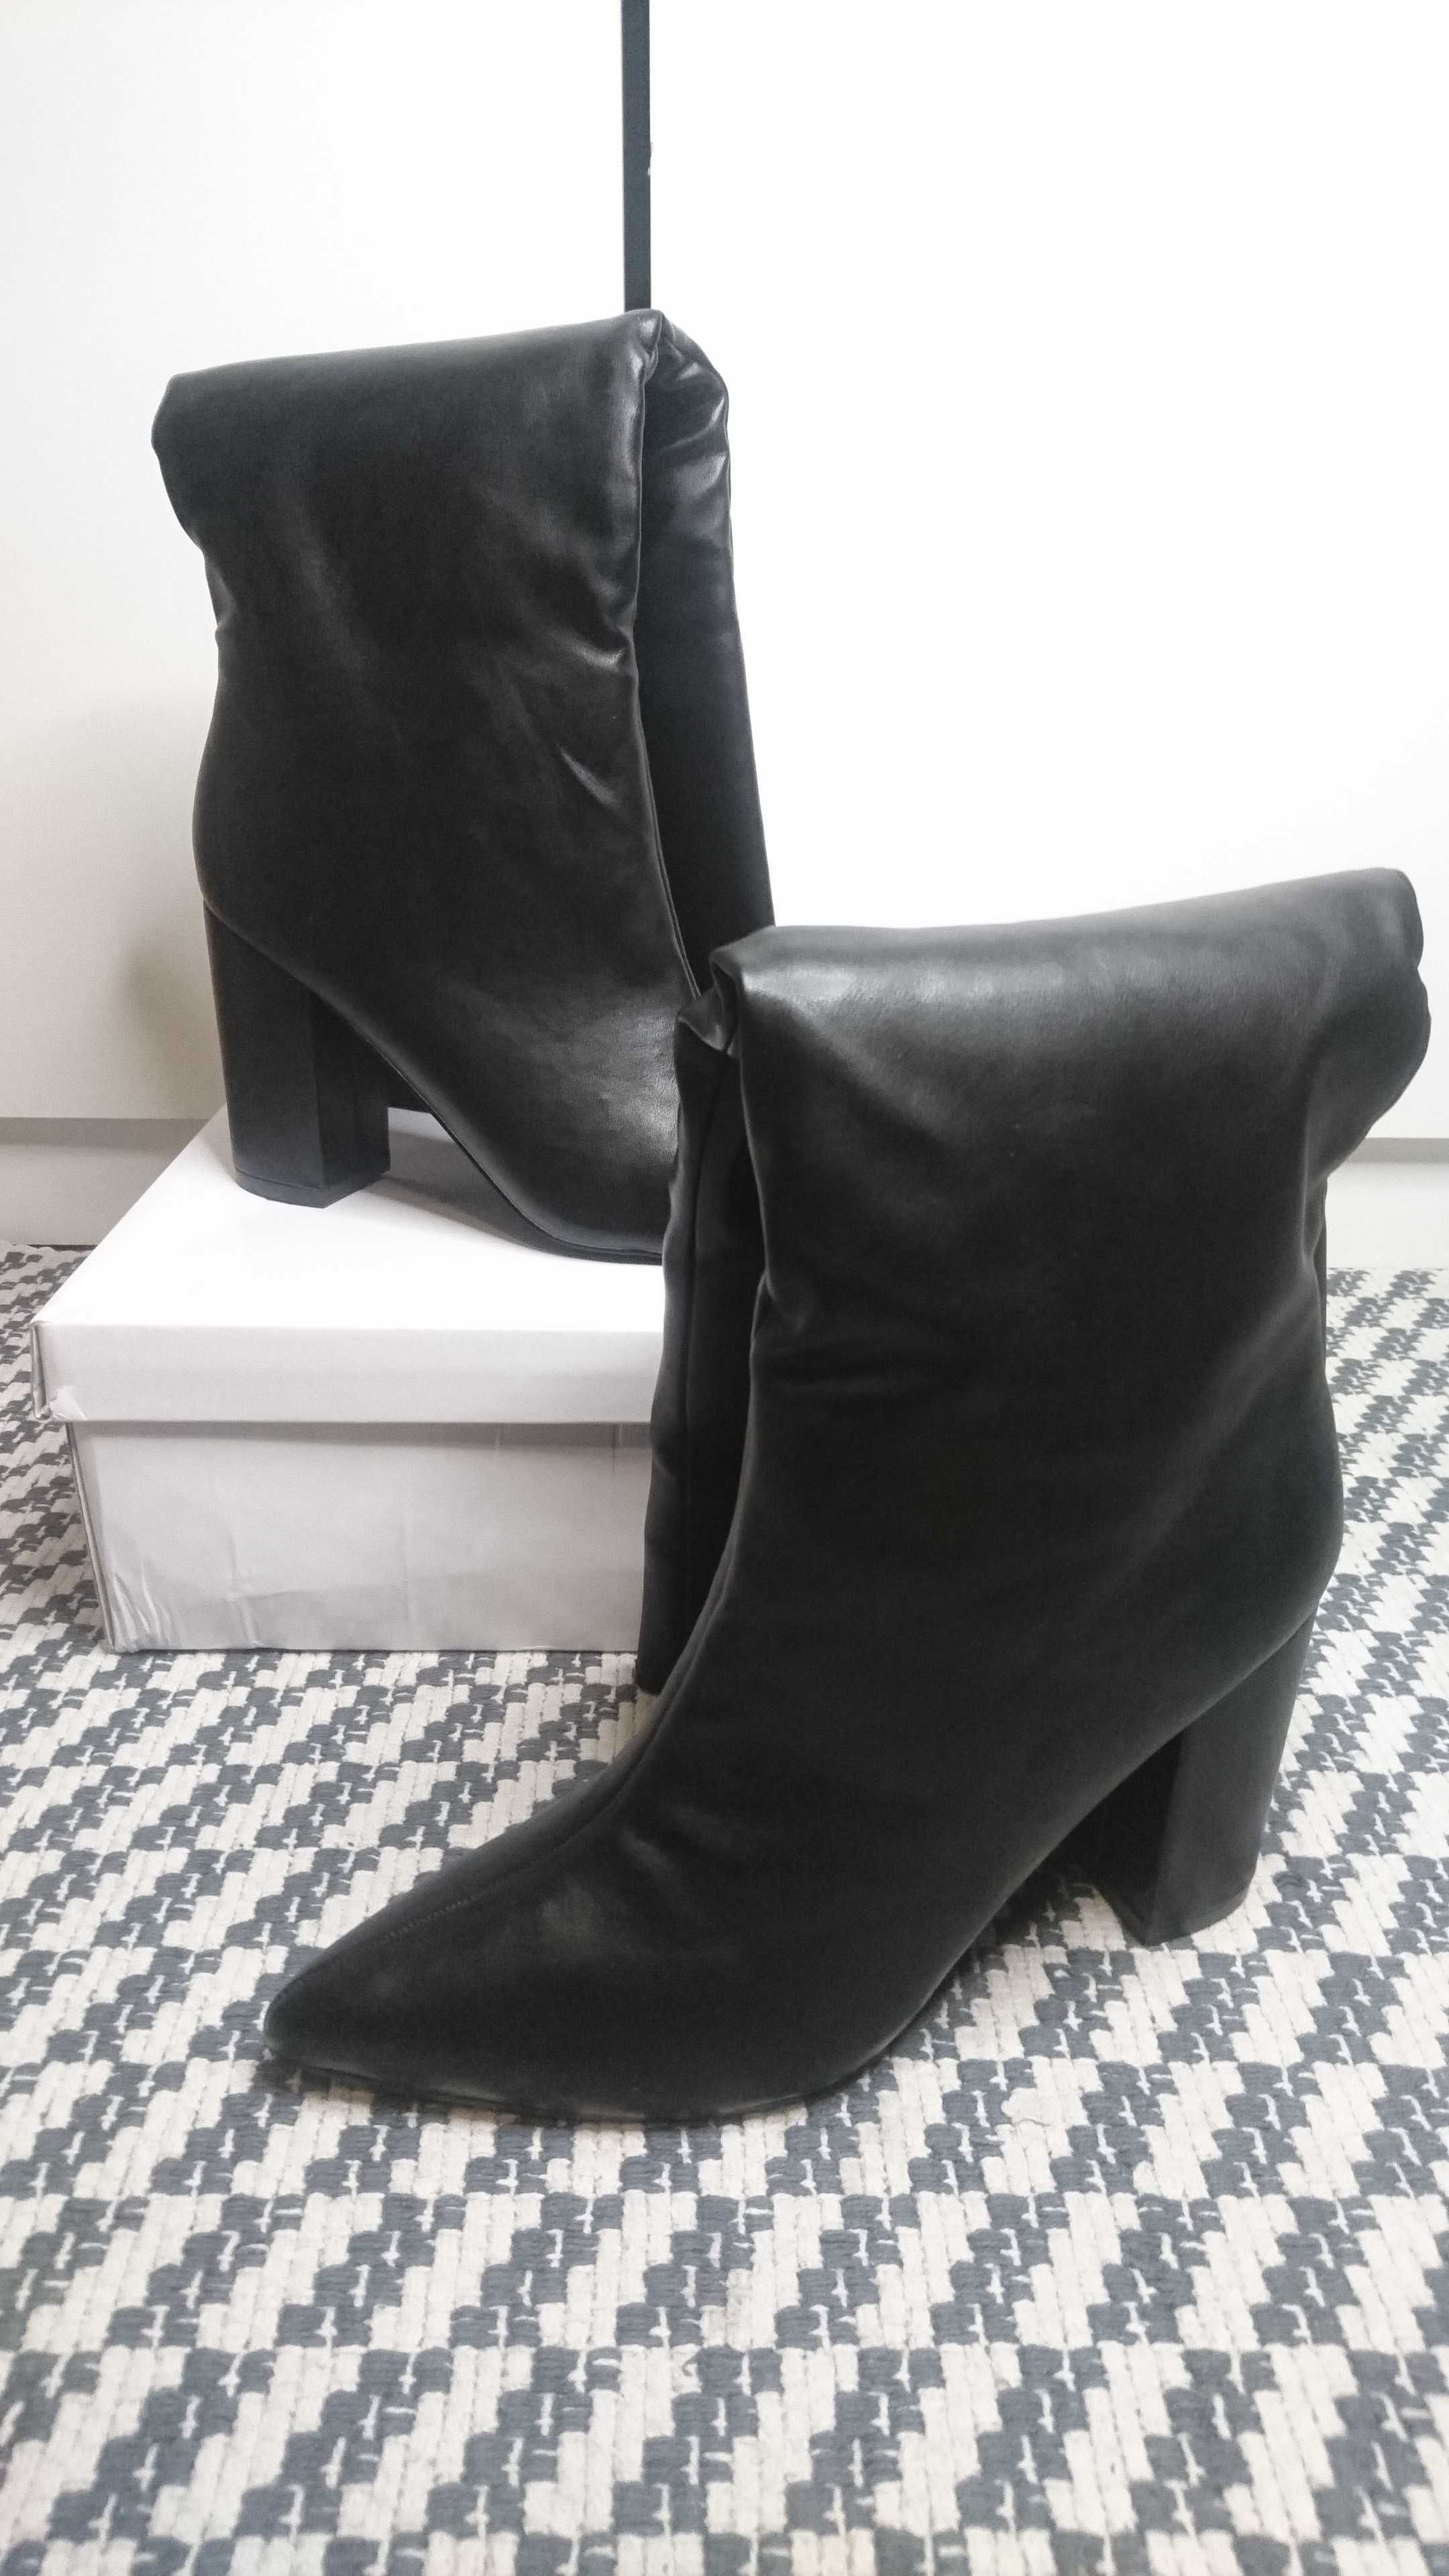 Buty Nly Nelly Shoes Wide Knee High Boot Black Kozaki Botki R.39